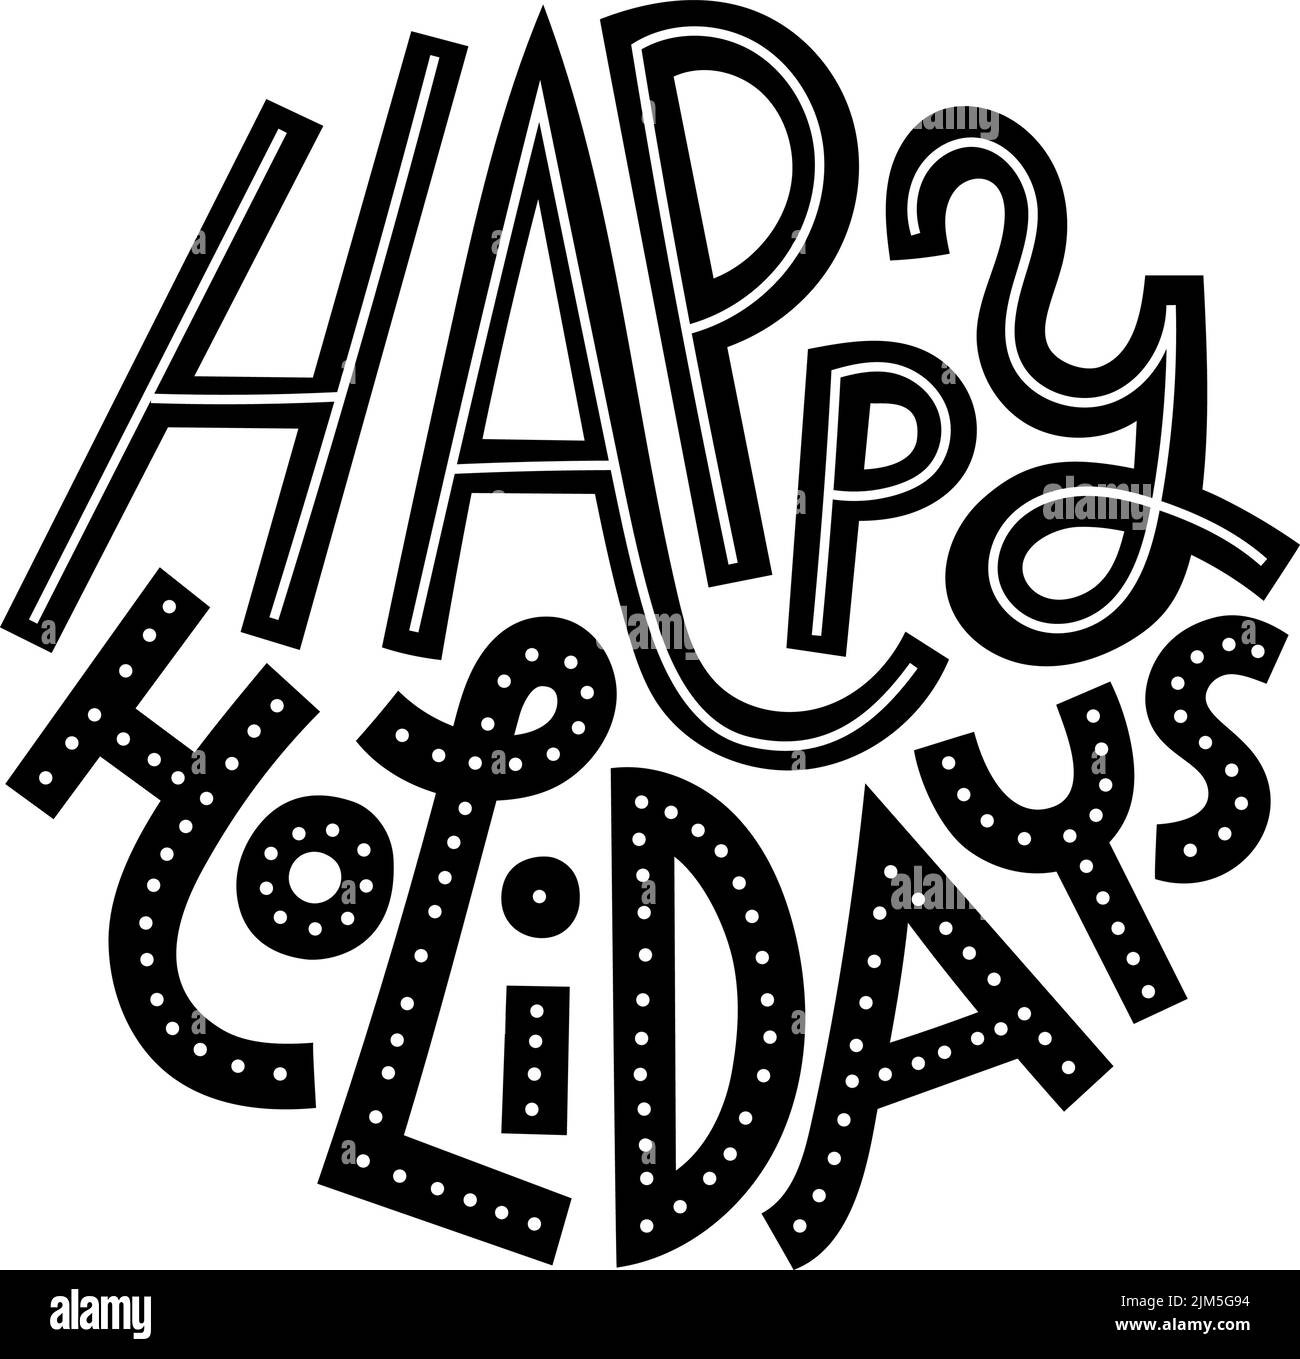 Happy holidays round-shaped lettering art Stock Vector